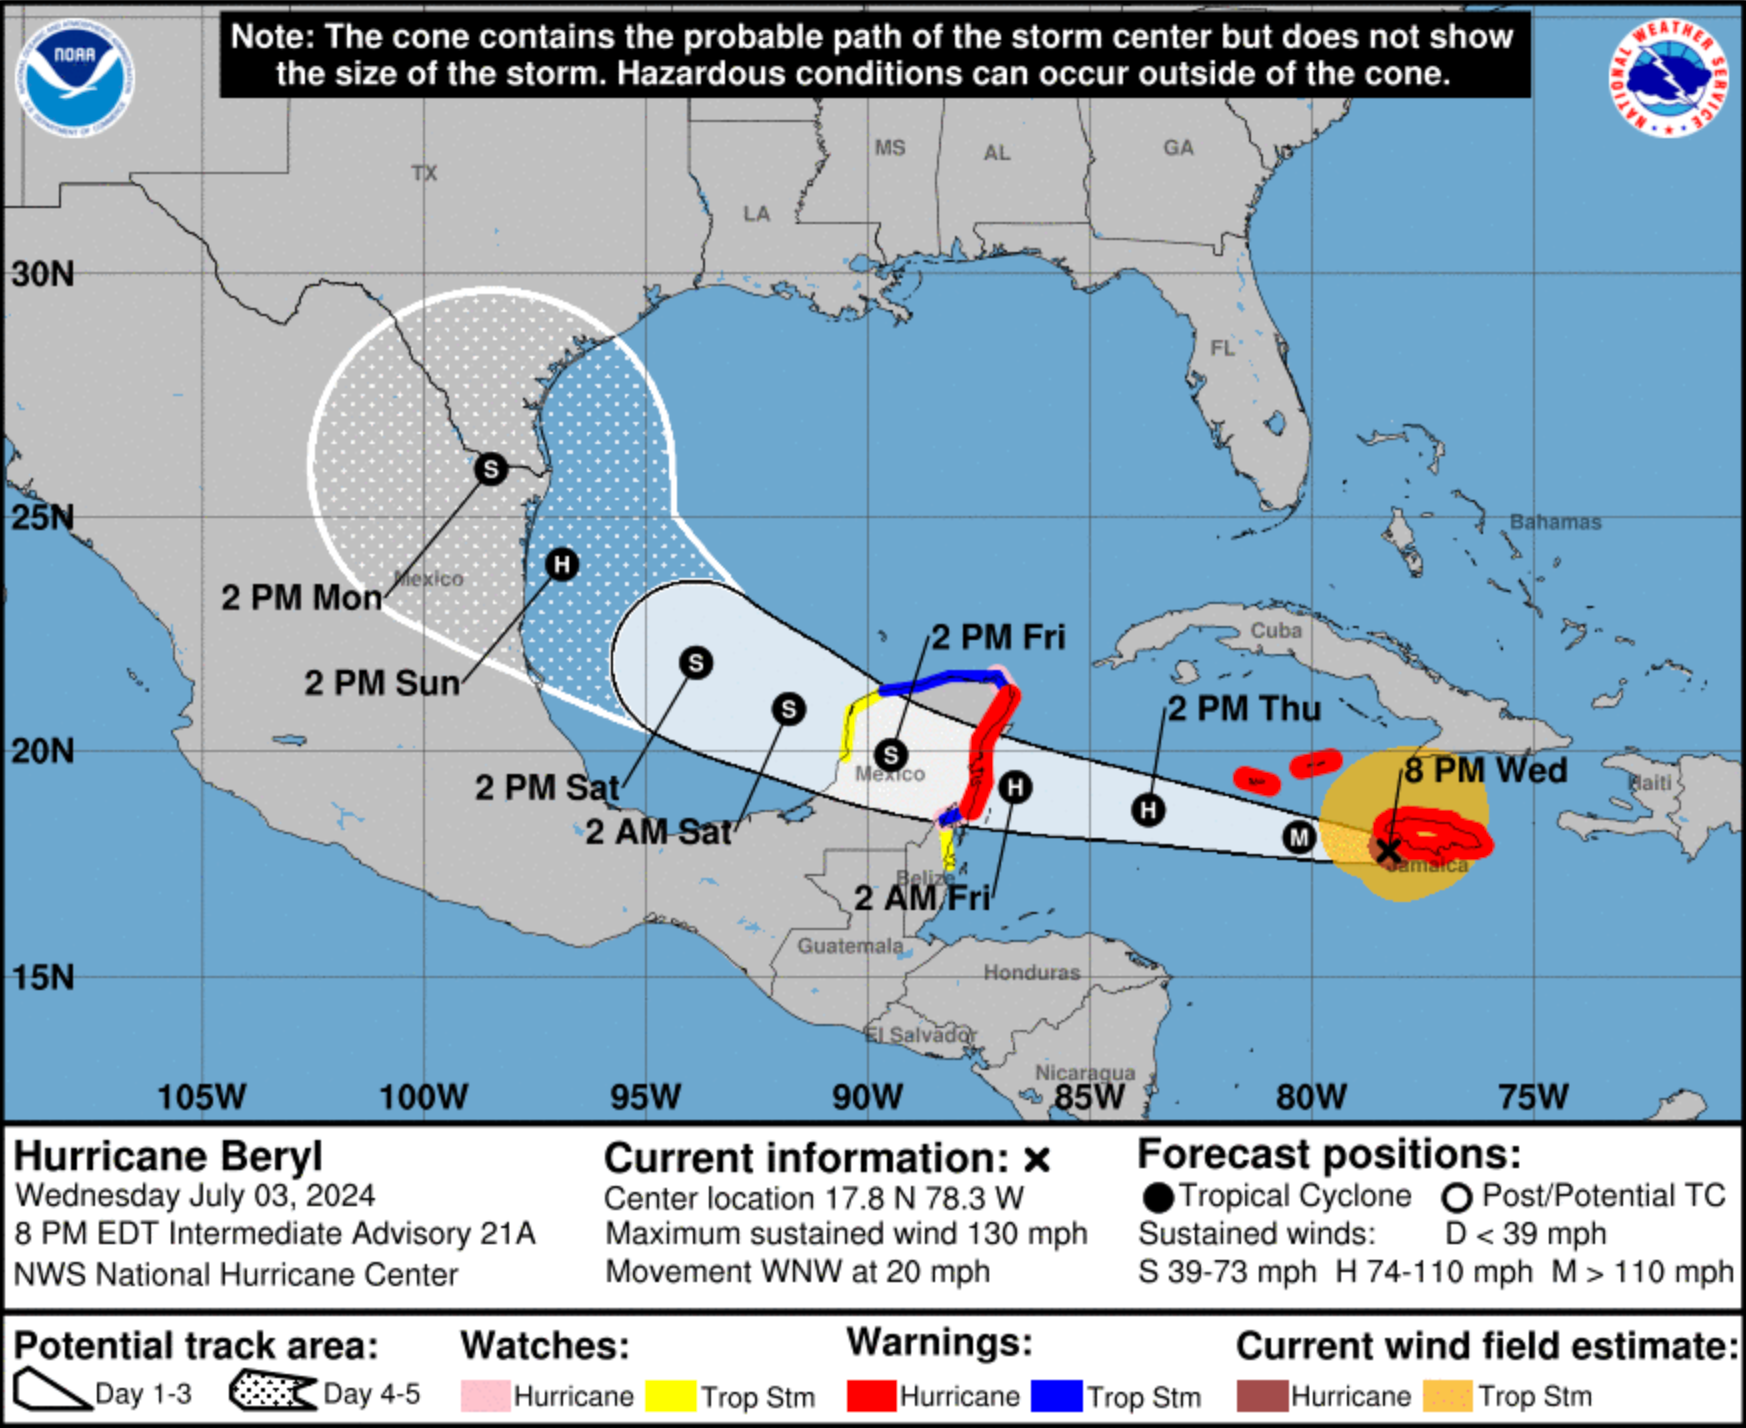 National Hurricane Center update on Beryl as of 8pm on Wednesday